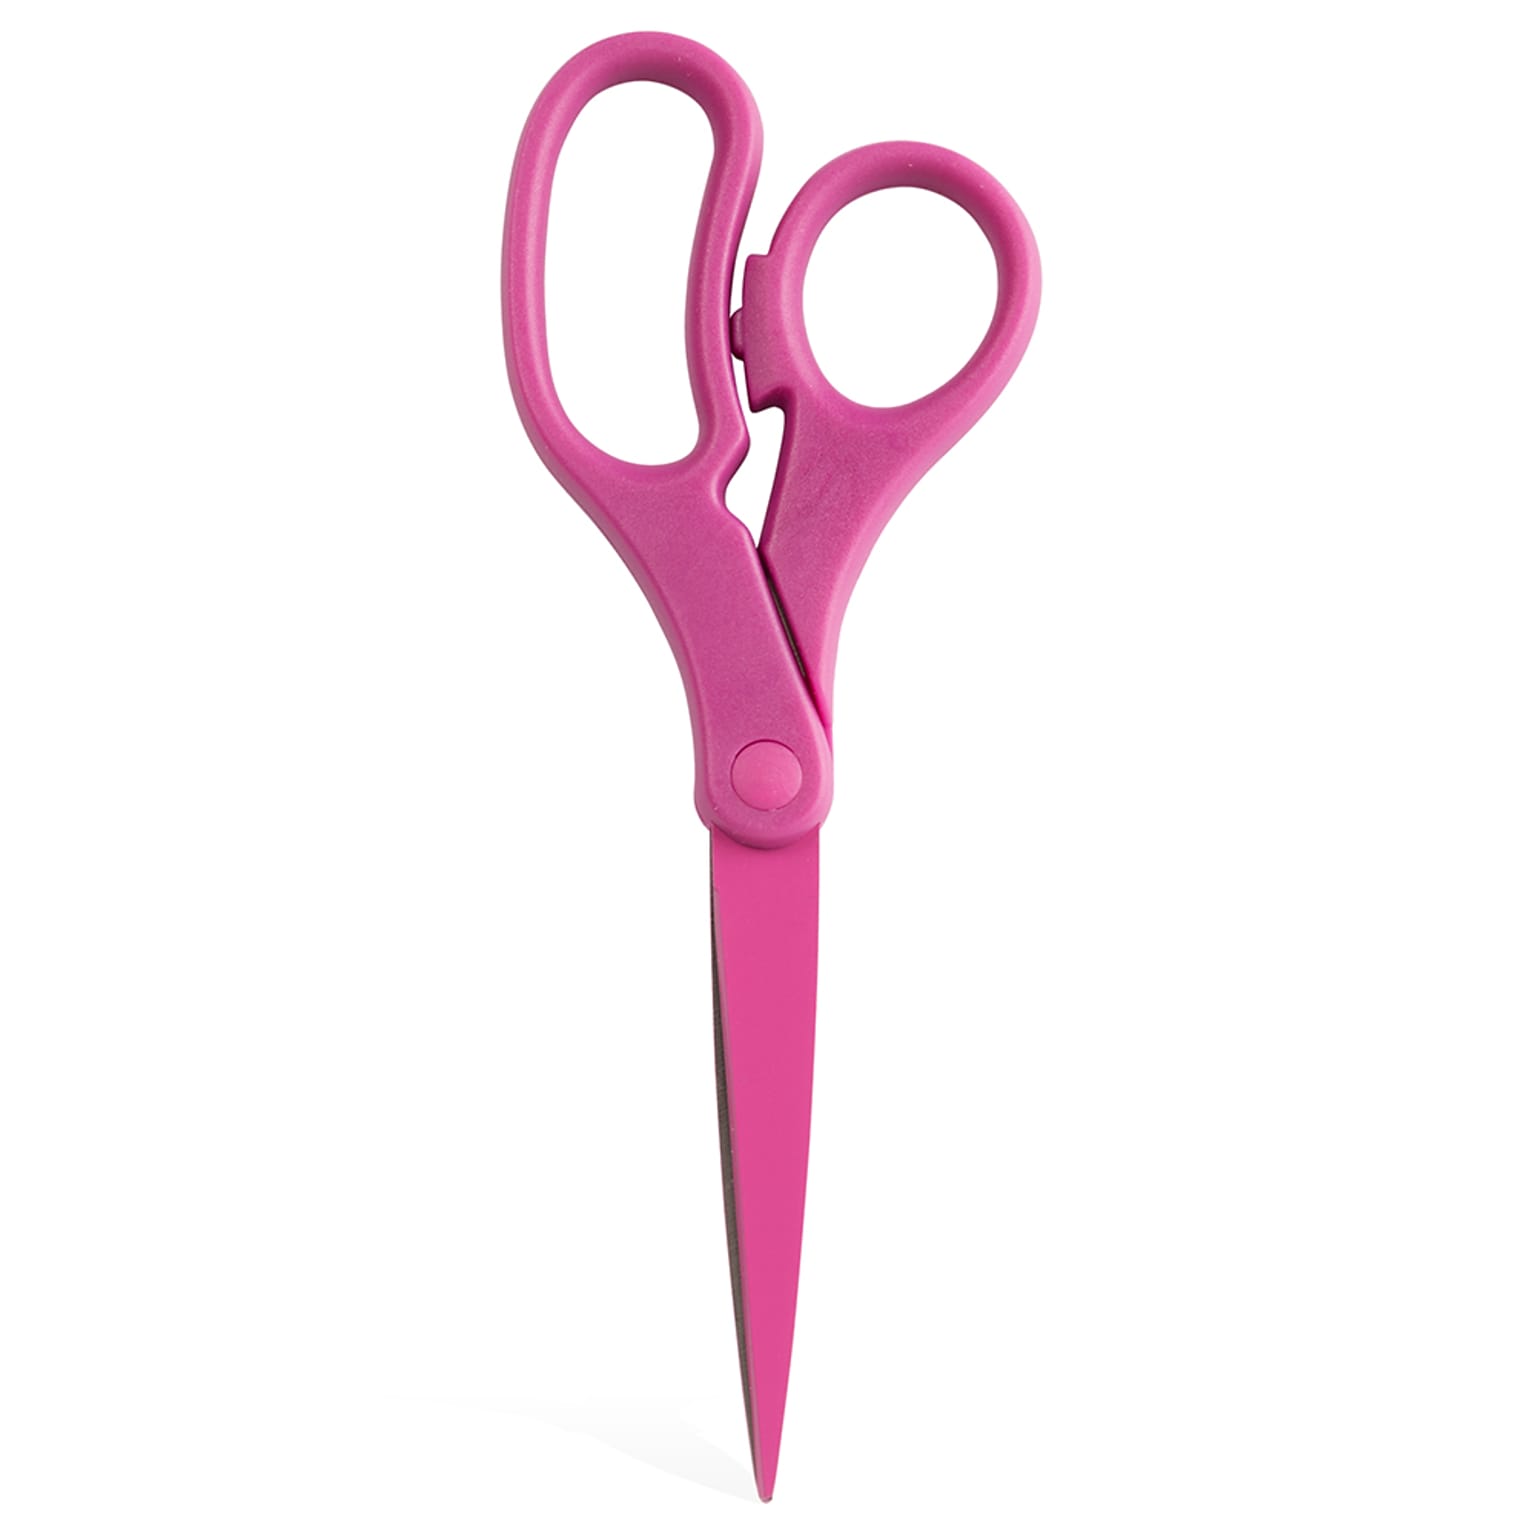 JAM Paper® Heavy Duty Multi-Purpose Precision Scissors, 8 Inch, Fuchsia Pink, Stainless Steel Blades, Sold Individually (342PI)